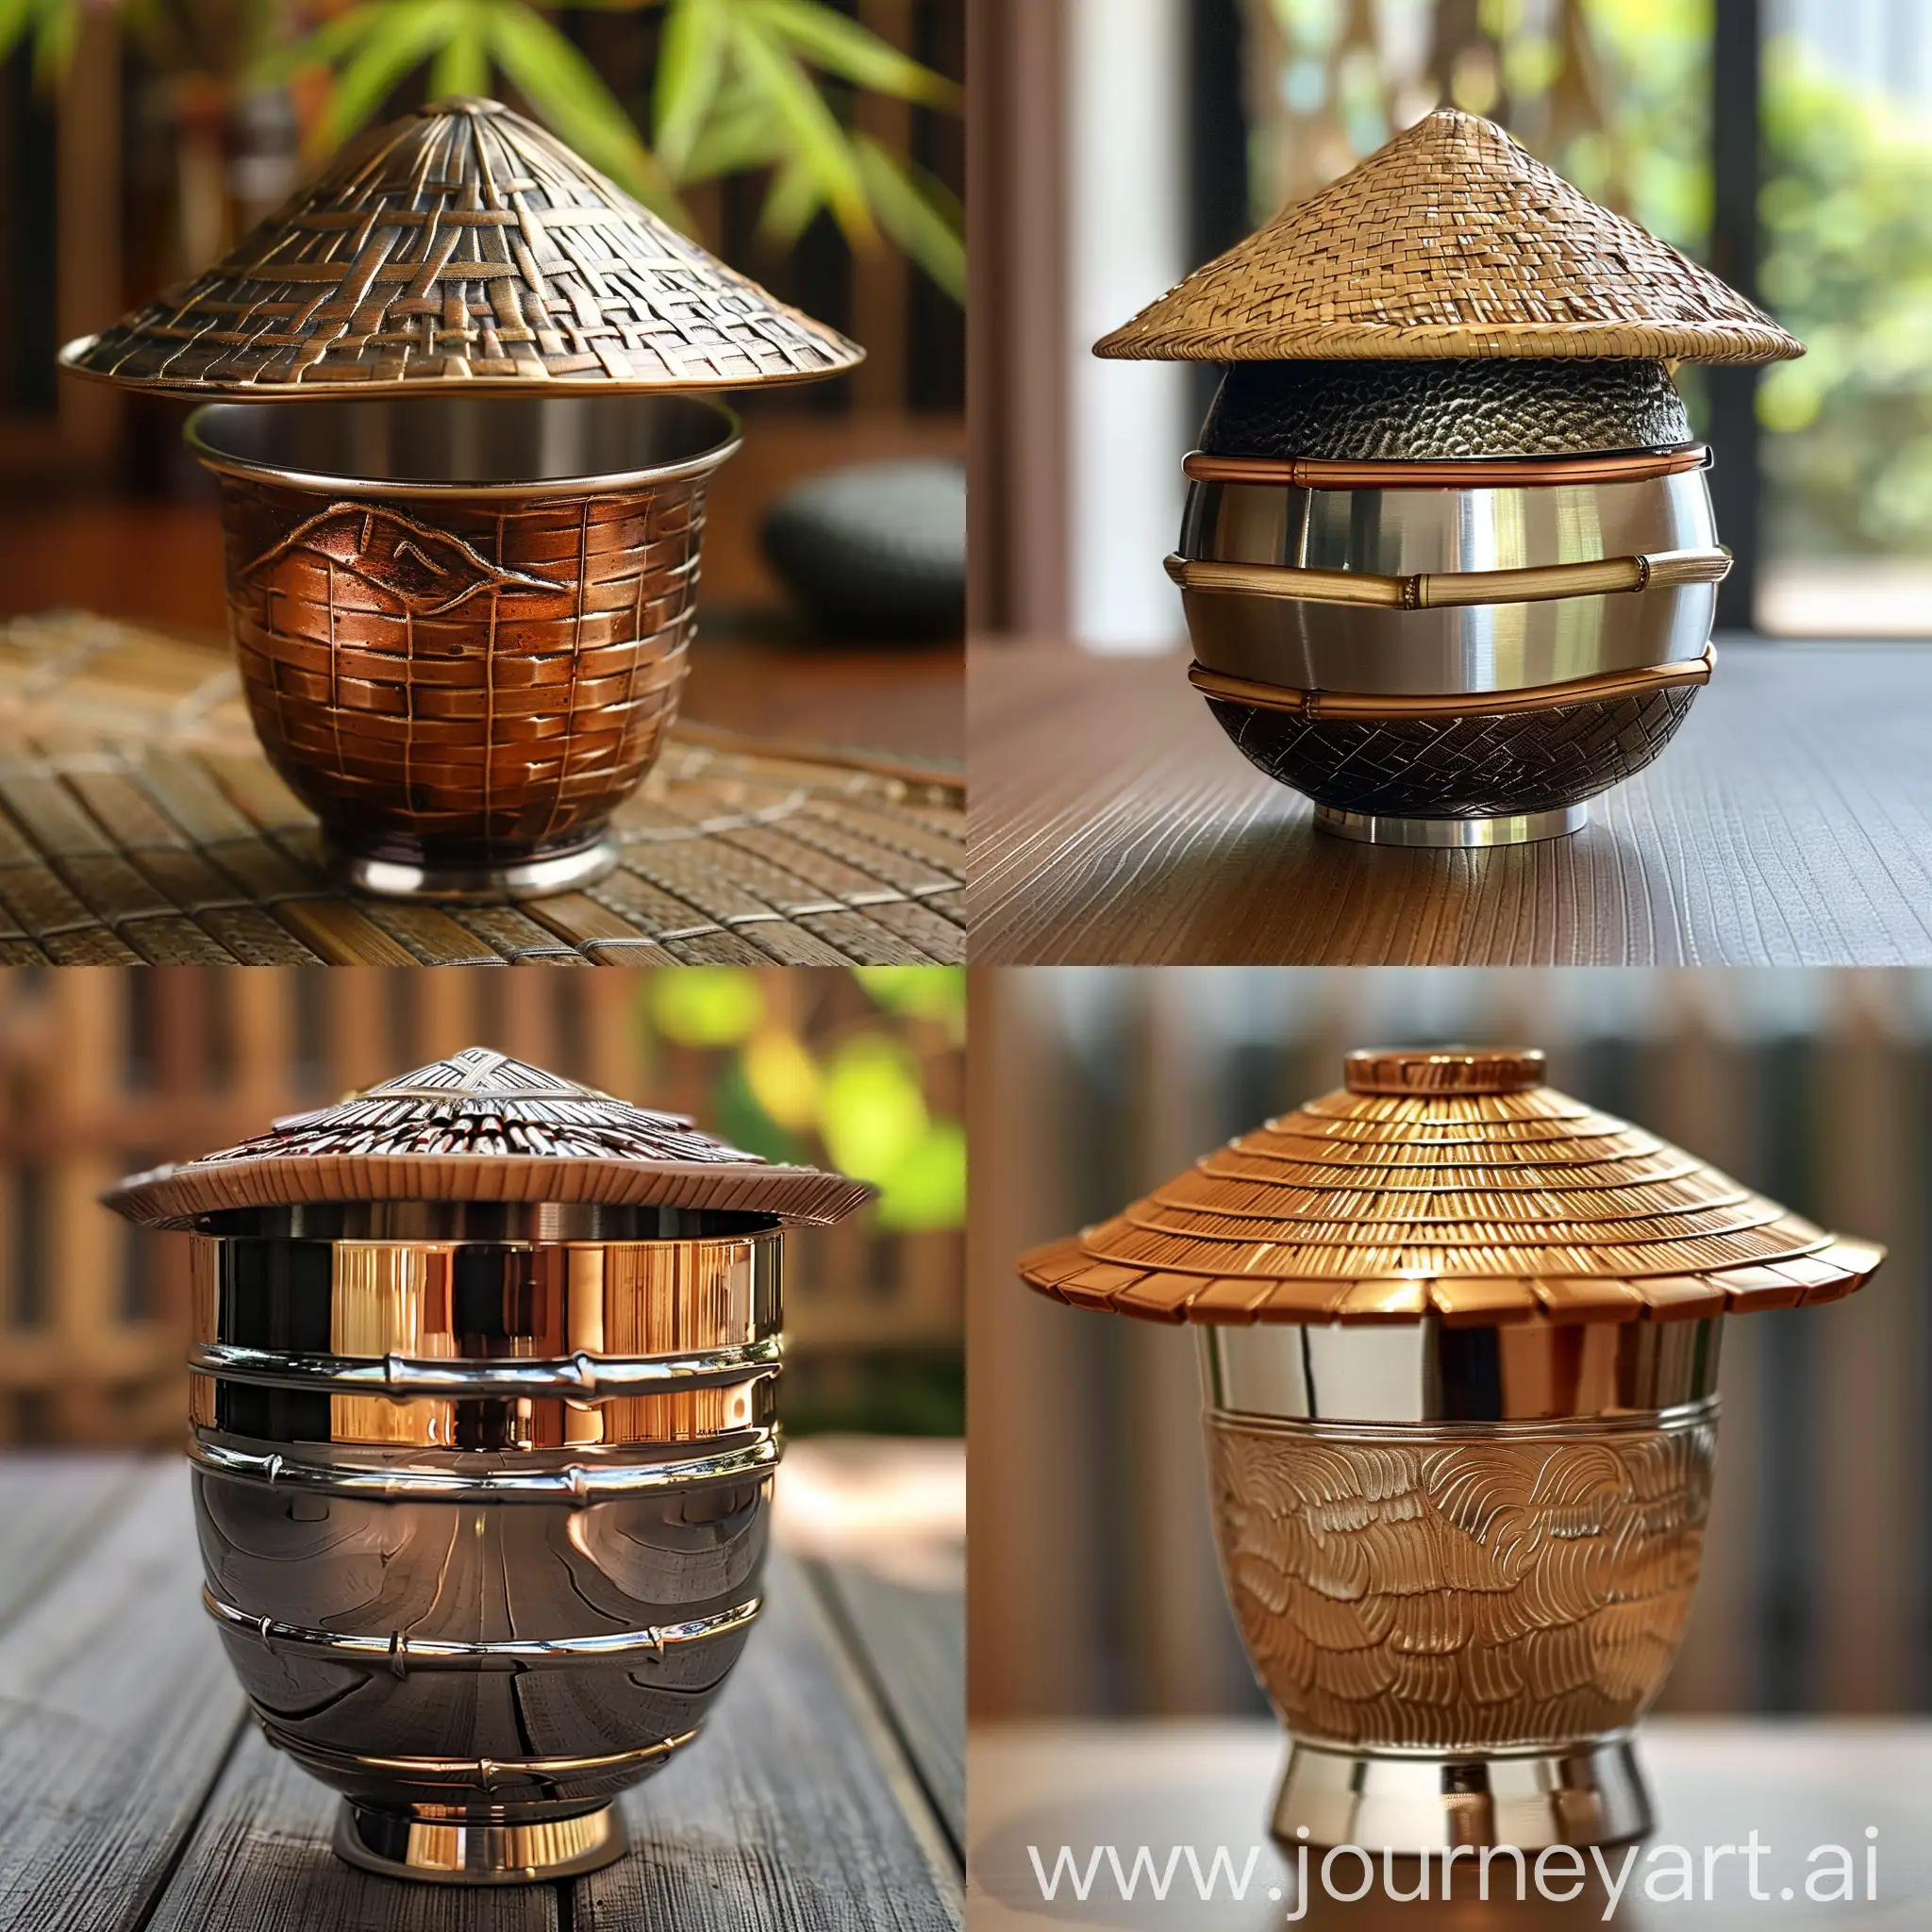 A Kuai Ke cup made of high-quality stainless steel with a bamboo hat design. 